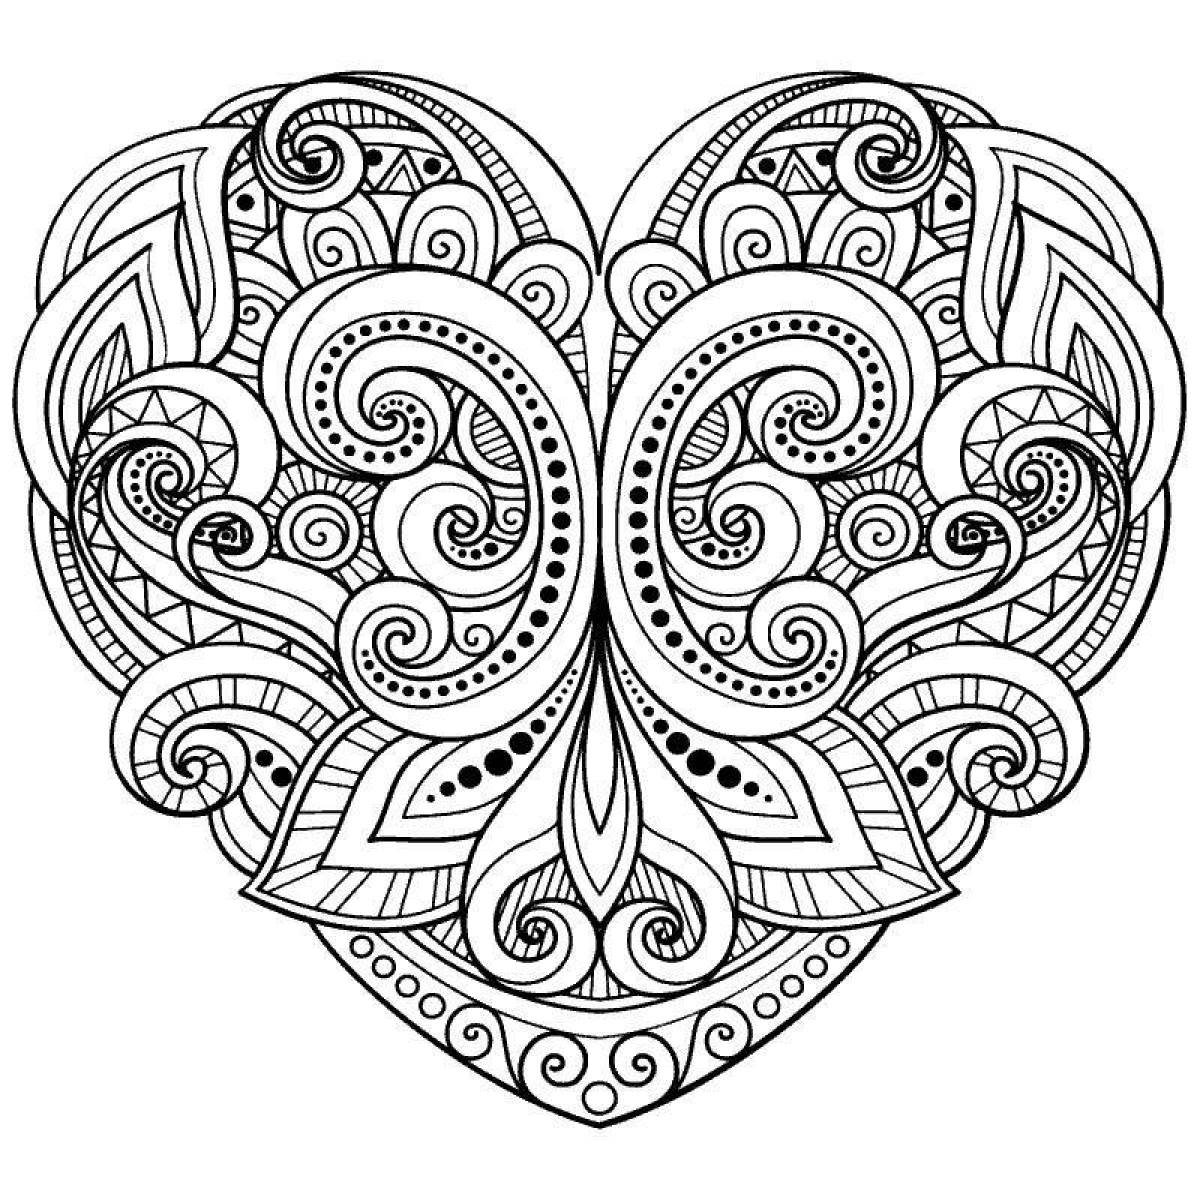 Refreshing heart anti-stress coloring book